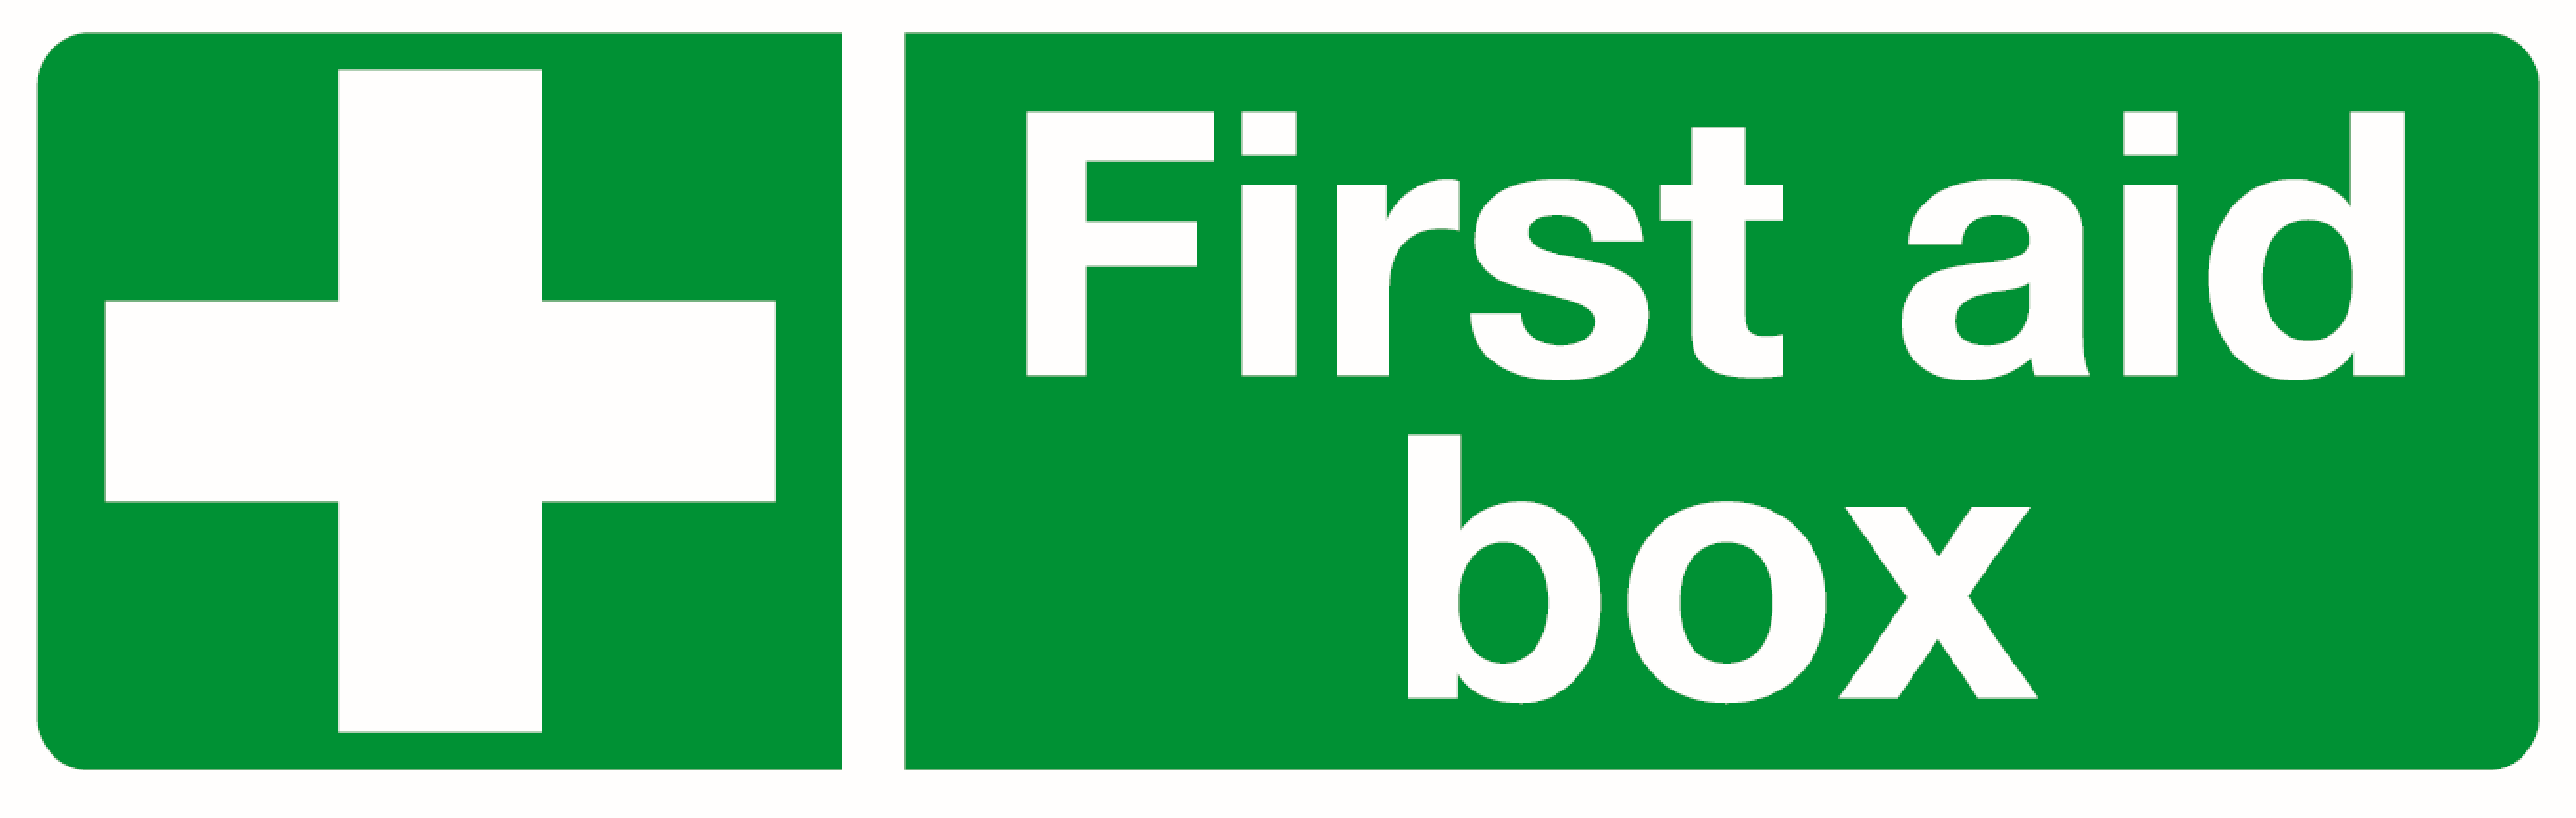 First Aid Box Logo - Free First Aid Sign, Download Free Clip Art, Free Clip Art